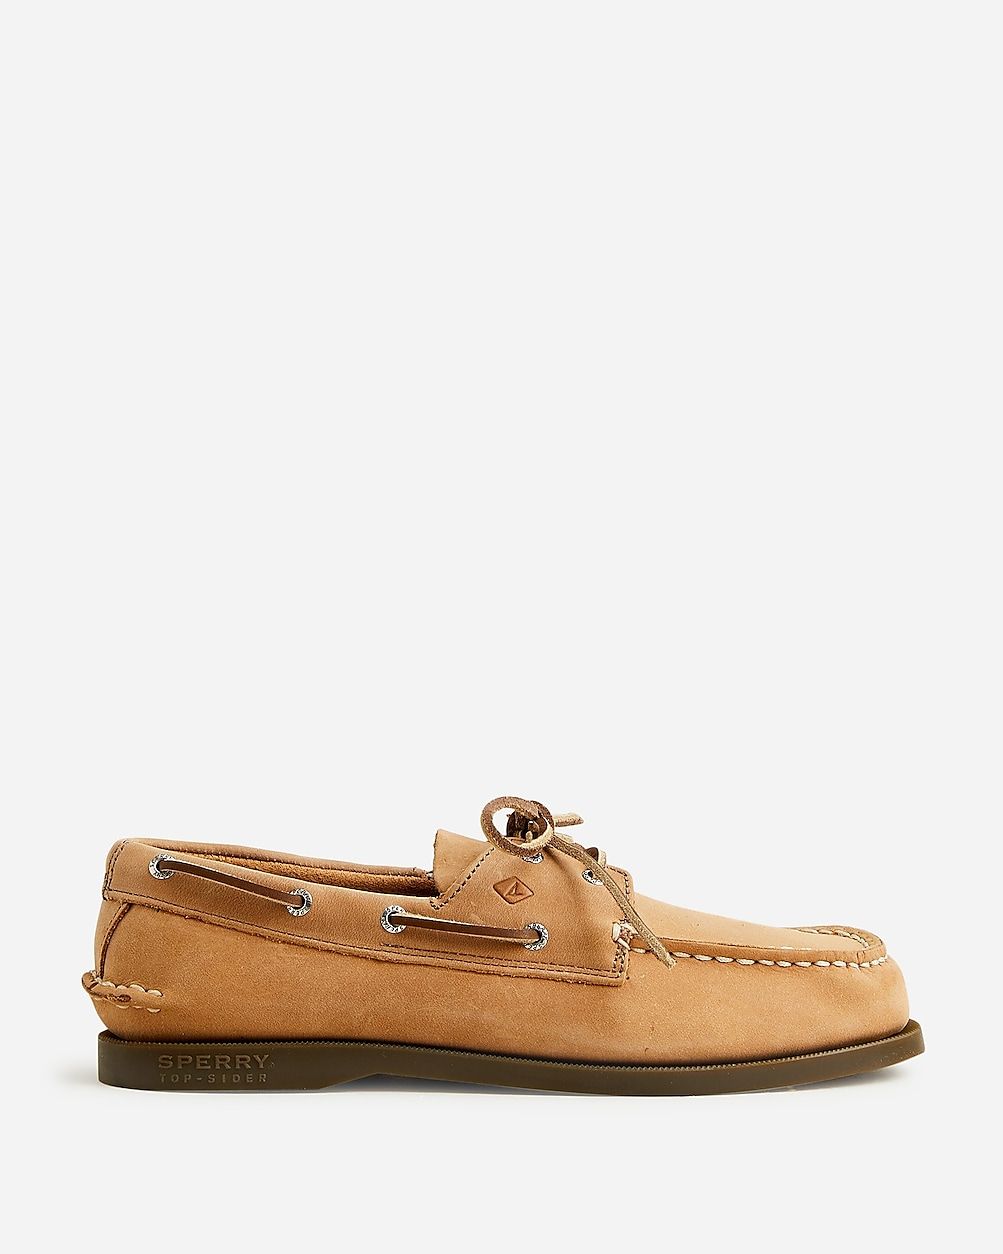 Boys' Sperry® Authentic Original two-eye boat shoes | J.Crew US